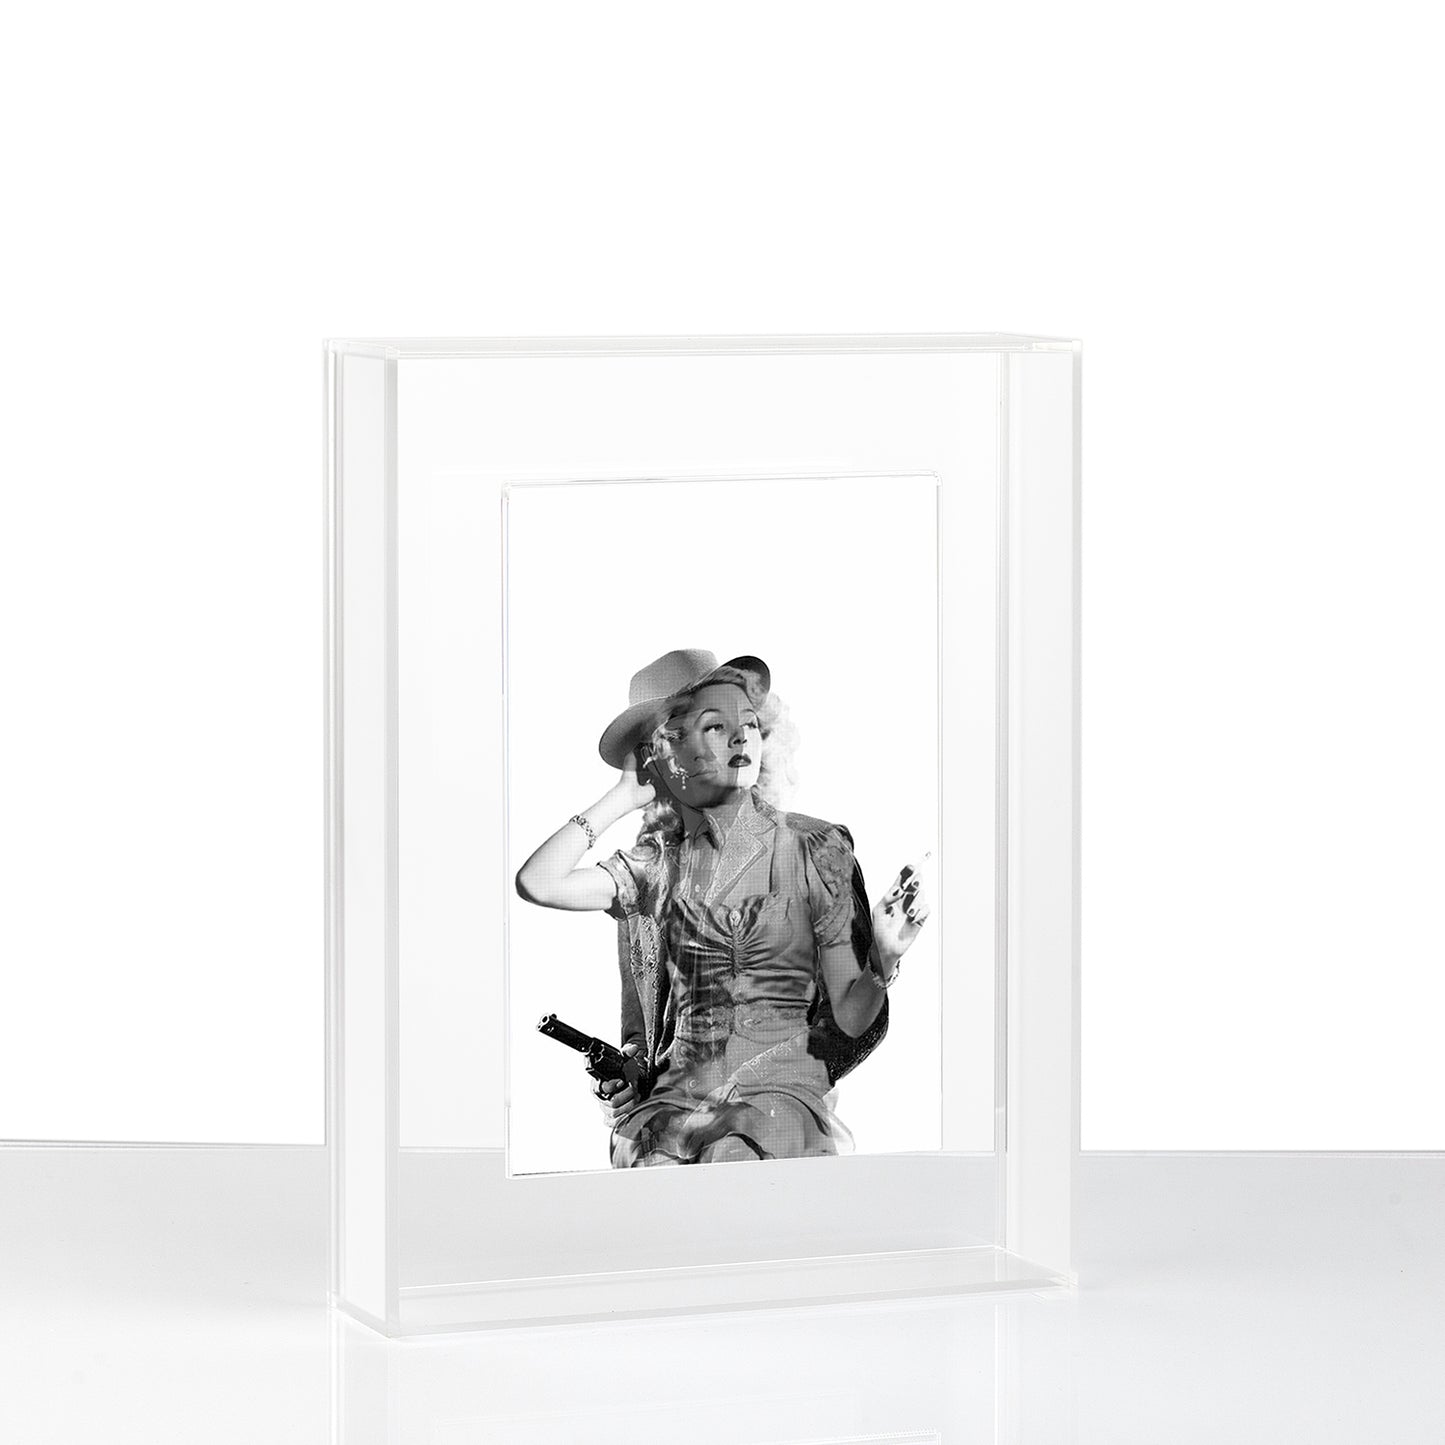 Smoking Gun by B. Shawn Cox 4x6  Framed In Your Choice of Float Frame with Magnetic Photo Holder